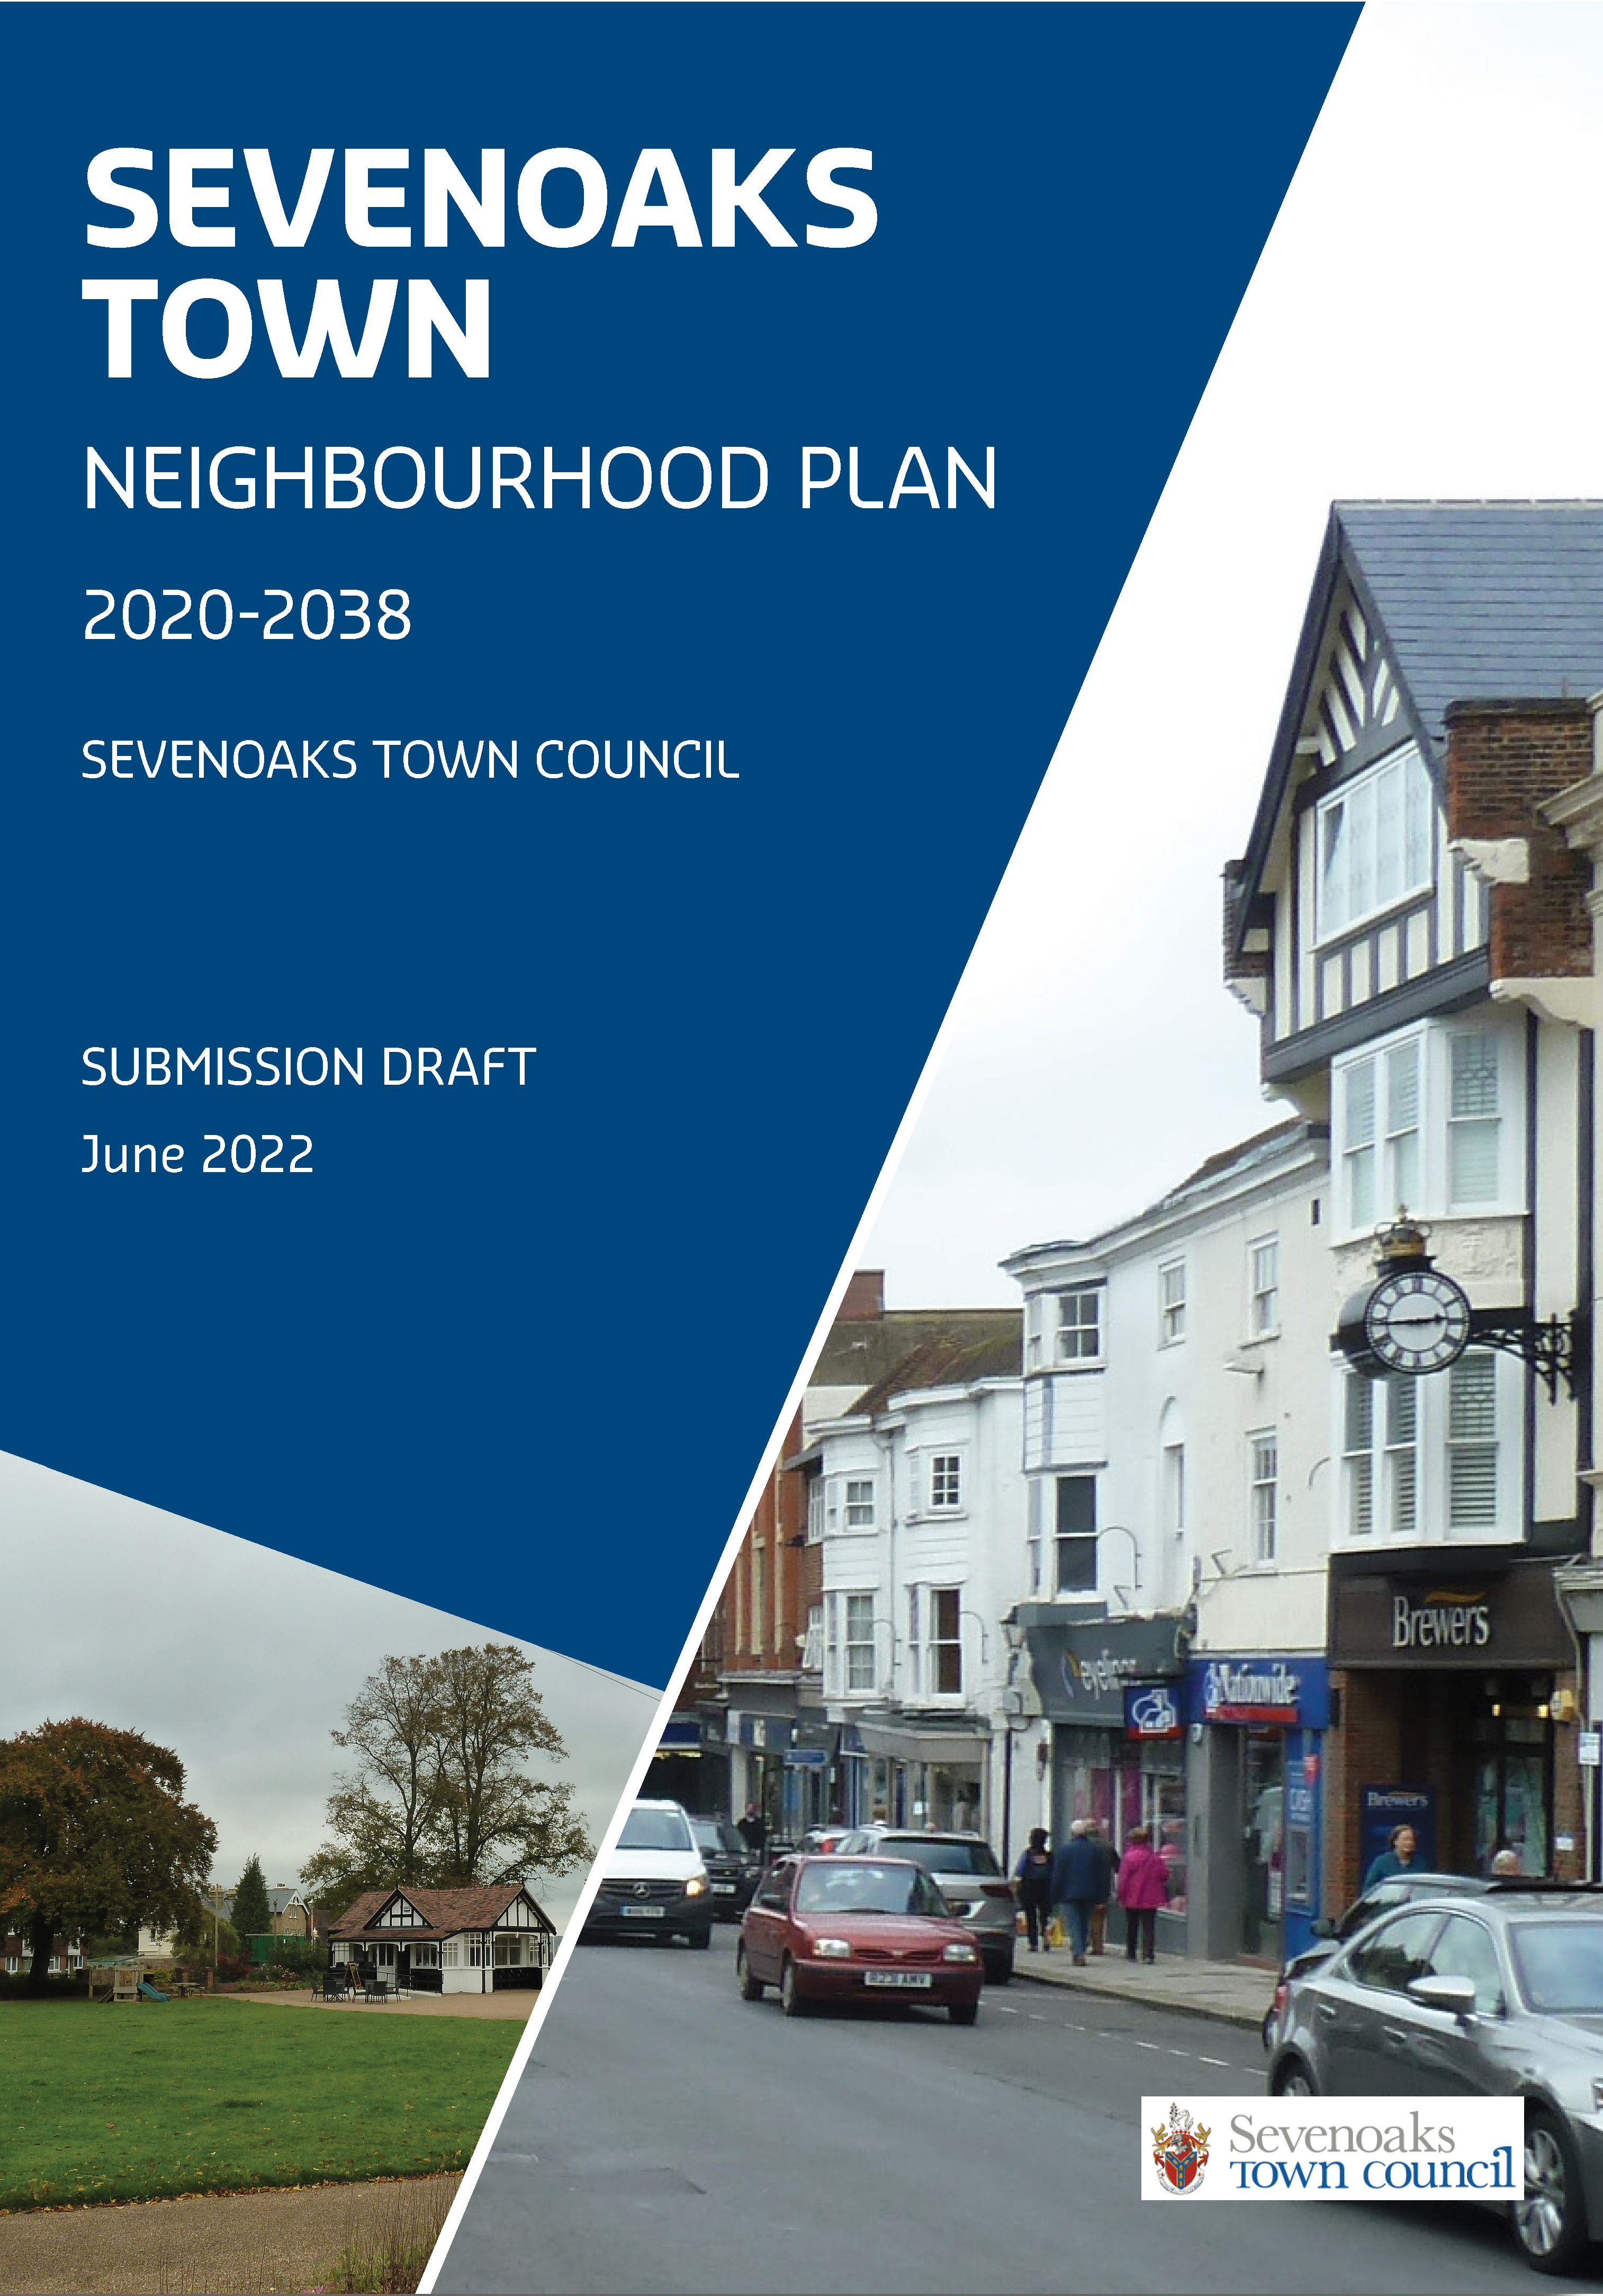 SEVENOAKS TOWN NEIGHBOURHOOD PLAN – CALL TO LOCAL BUSINESSES AND ORGANISATIONS WHO WANT TO BE INVOLVED IN ITS MONITORING AND IMPLEMENTATION